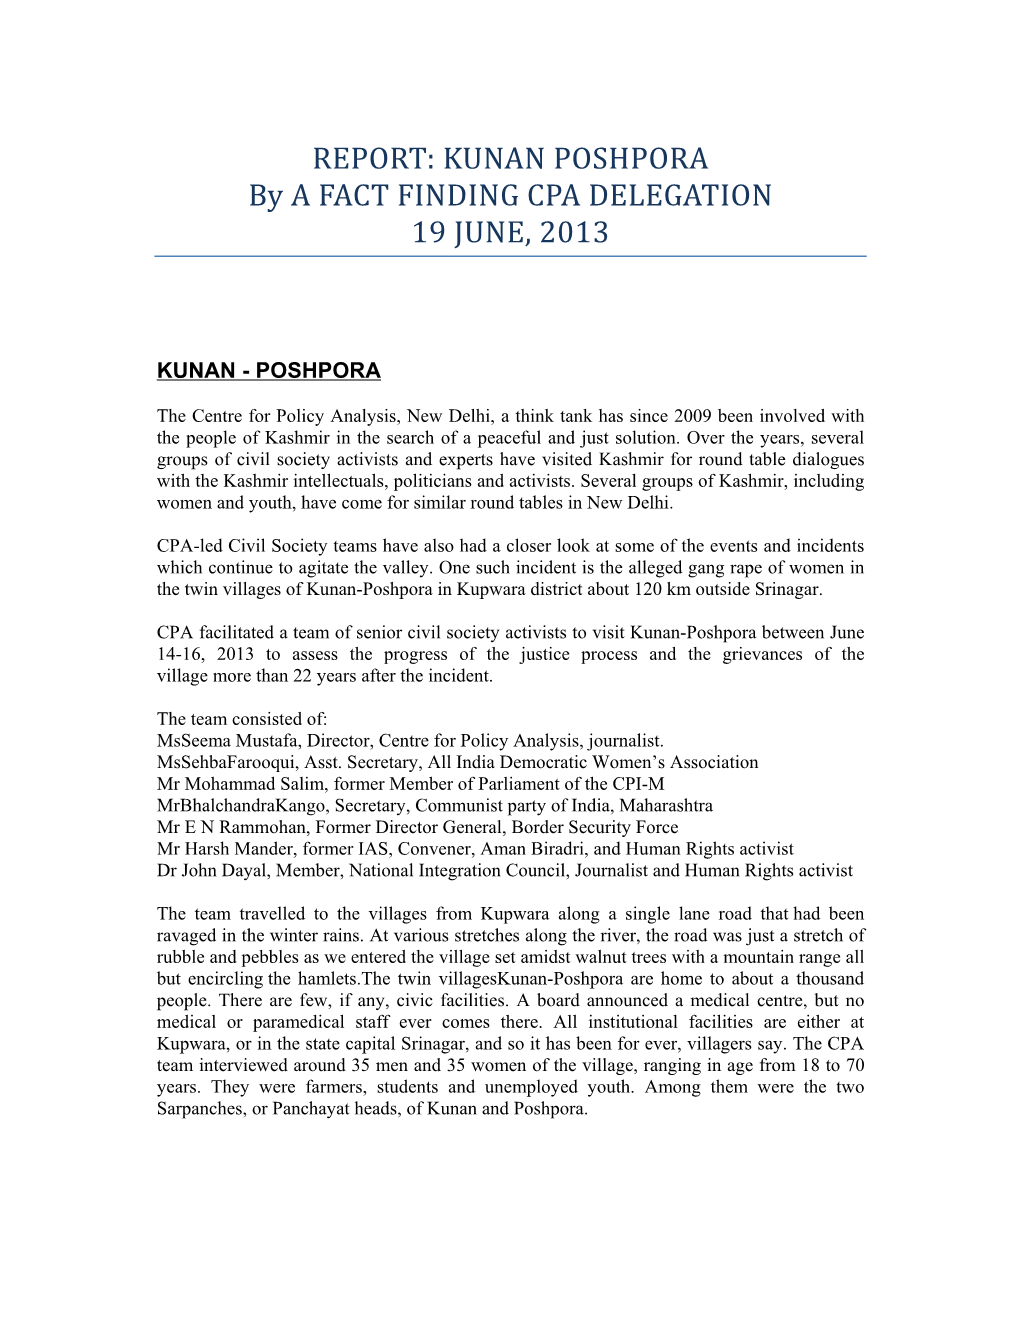 REPORT: KUNAN POSHPORA by a FACT FINDING CPA DELEGATION 19 JUNE, 2013